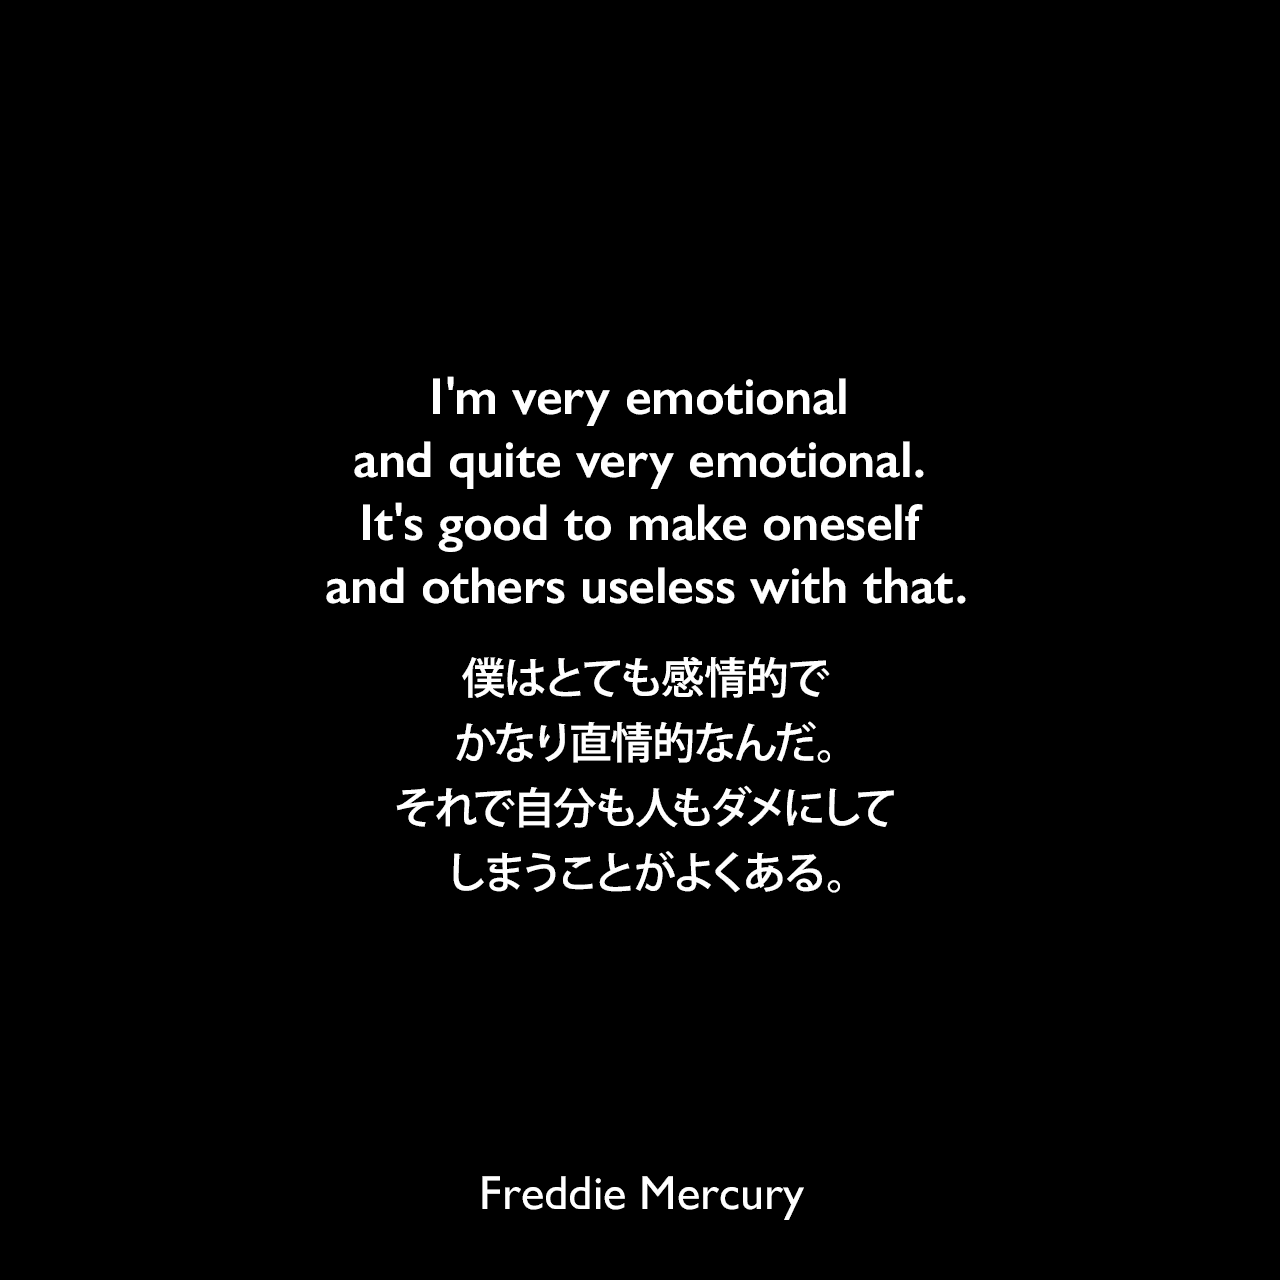 I'm very emotional and quite very emotional. It's good to make oneself and others useless with that.僕はとても感情的で、かなり直情的なんだ。それで自分も人もダメにしてしまうことがよくある。Freddie Mercury